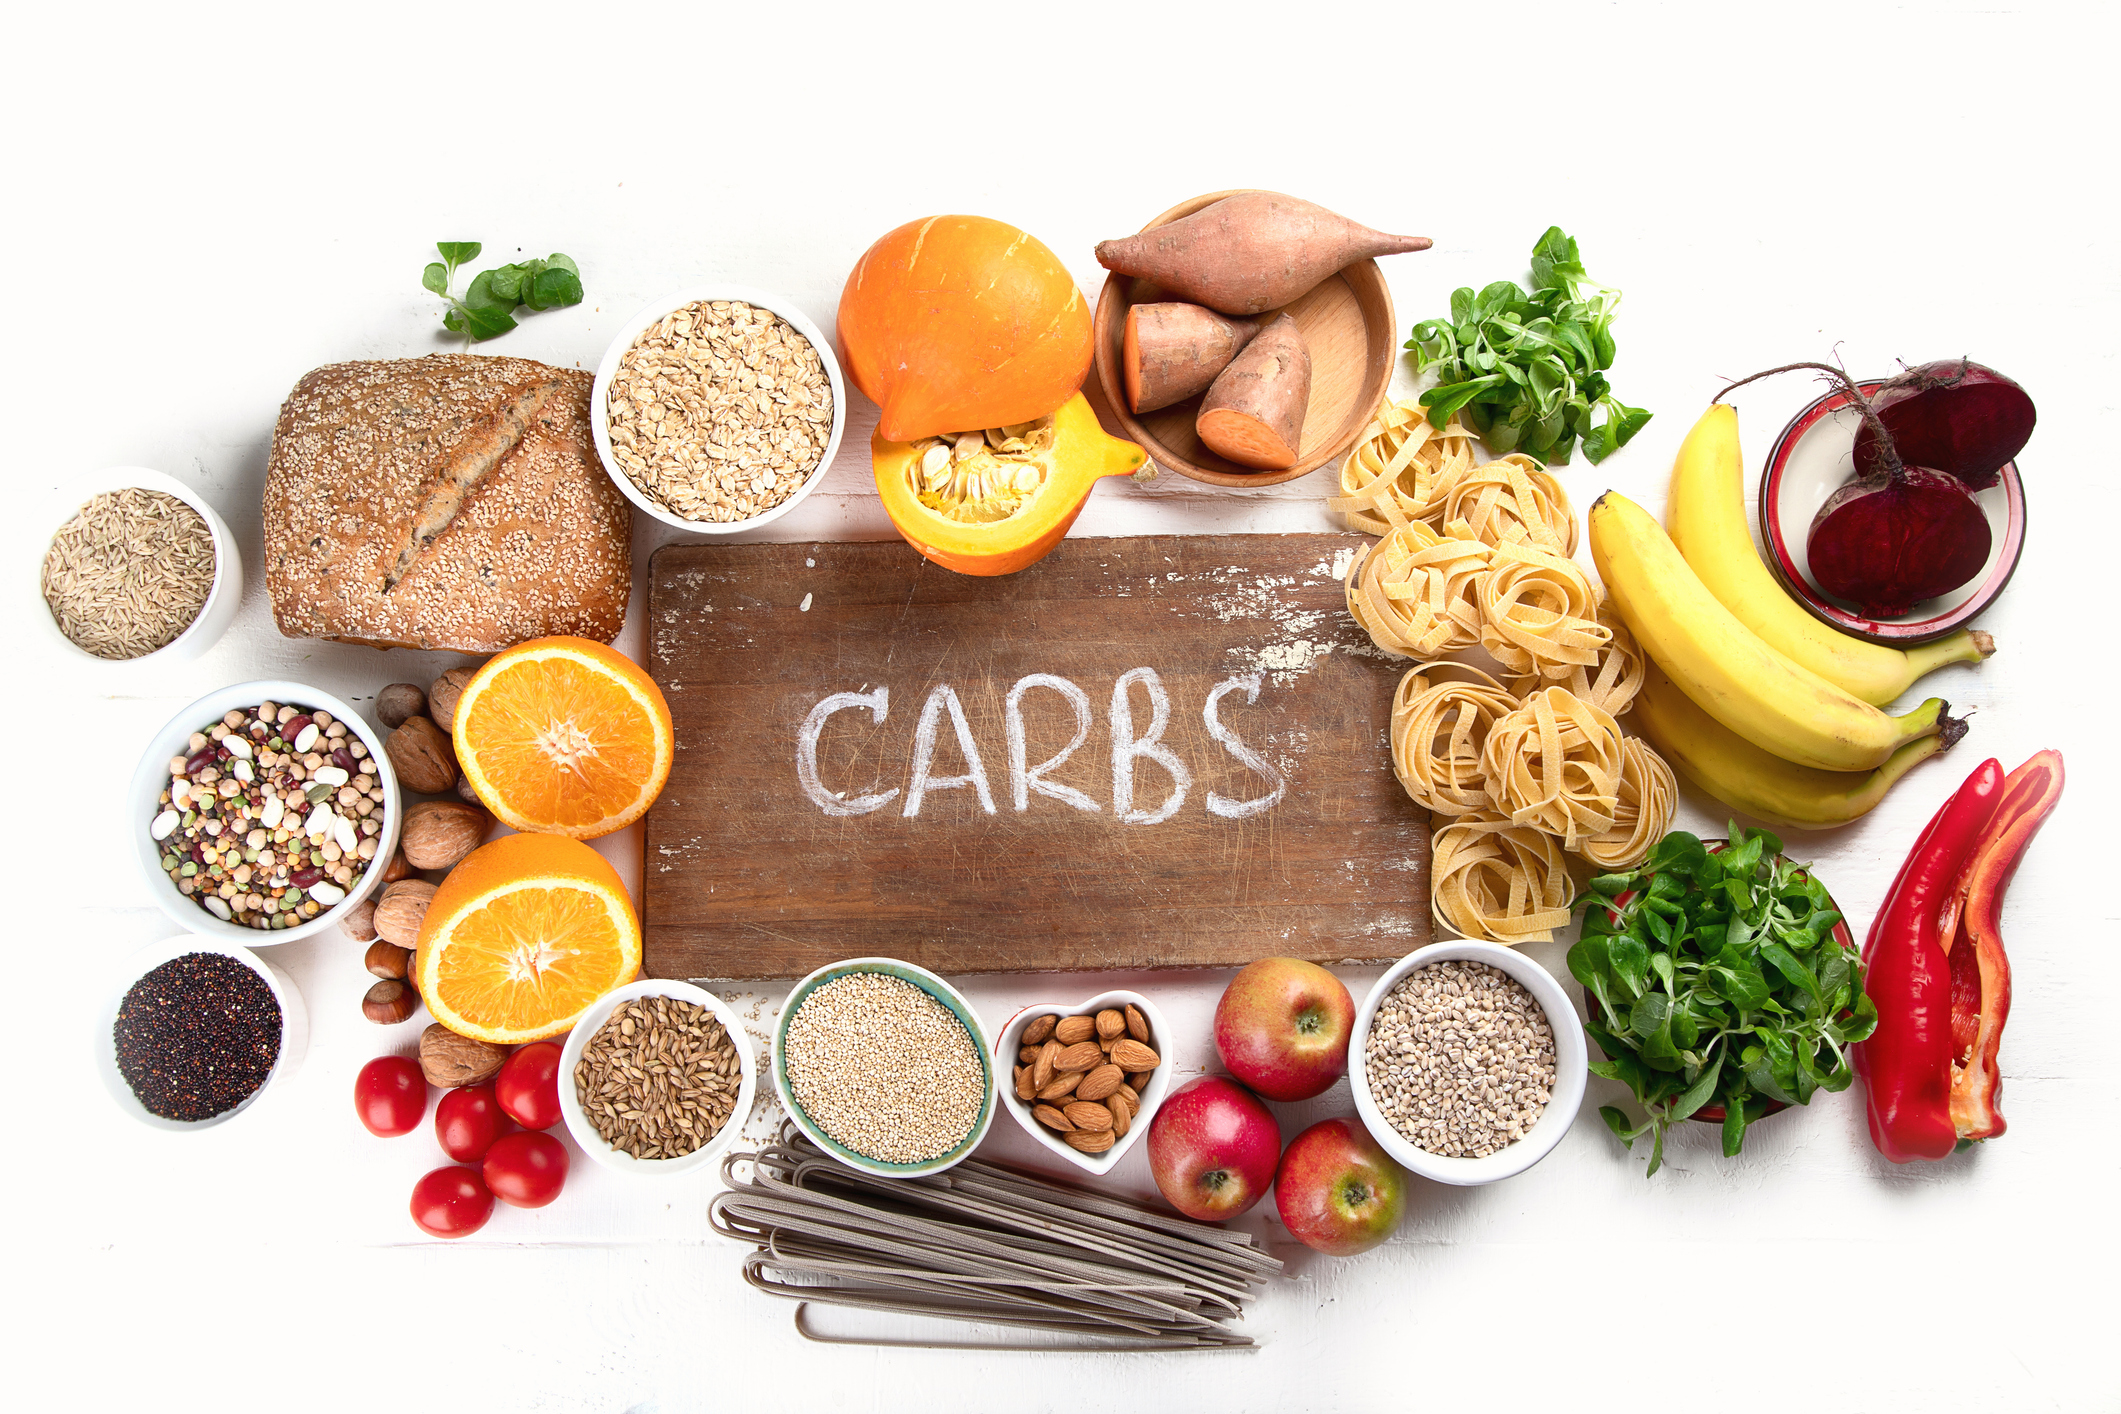 Wooden sign with the word "carbs" surrounded by various carbs discussed in the article